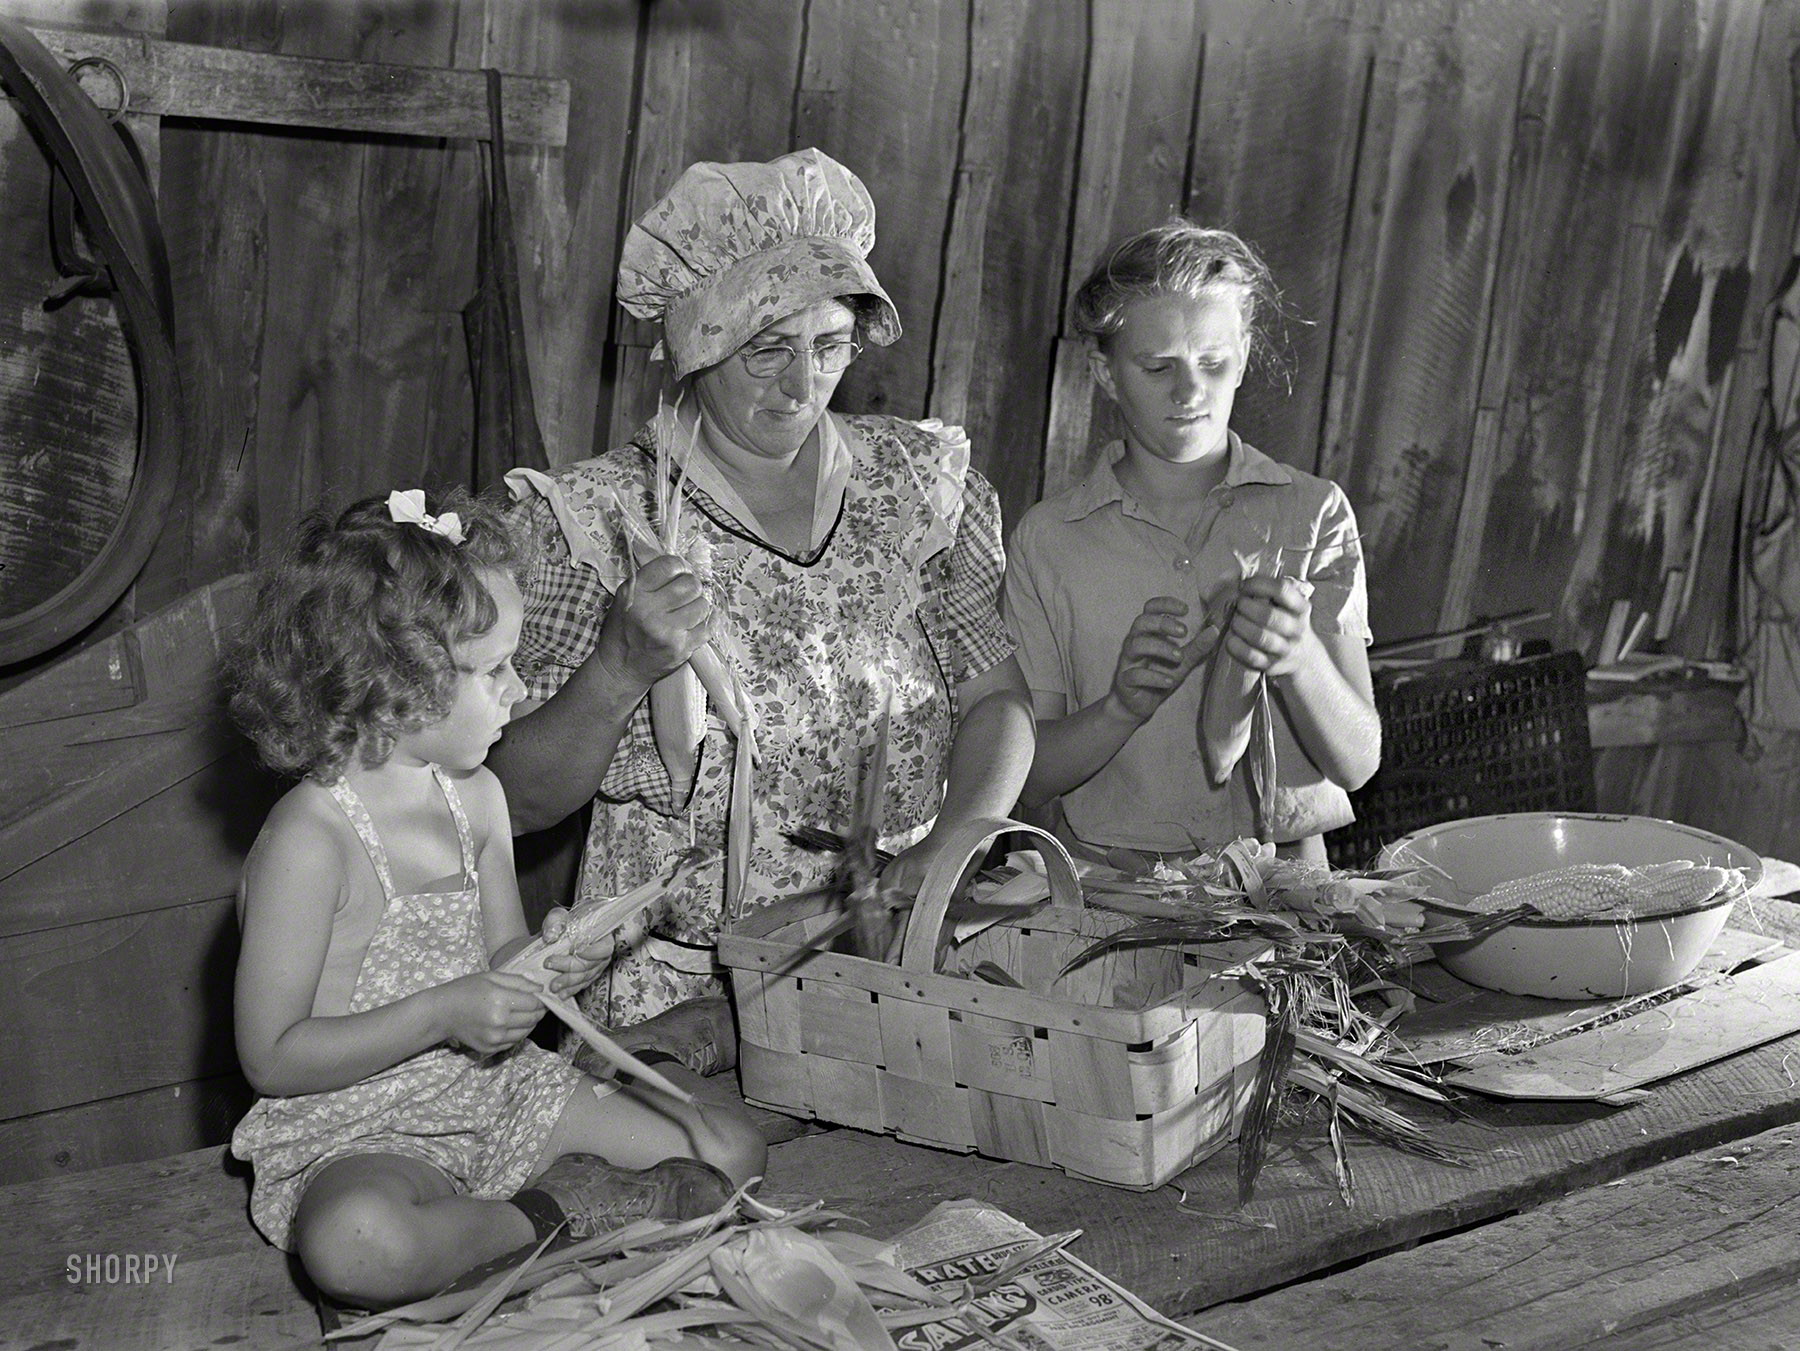 Sept. 1942. Canfield, Ohio. "Mrs. Harry Mercer, a young neighbor and grandchild, husking and removing silk from the corn. The corn will be dried and stored for later use." Photo by Ann Rosener, Office of War Information. View full size.